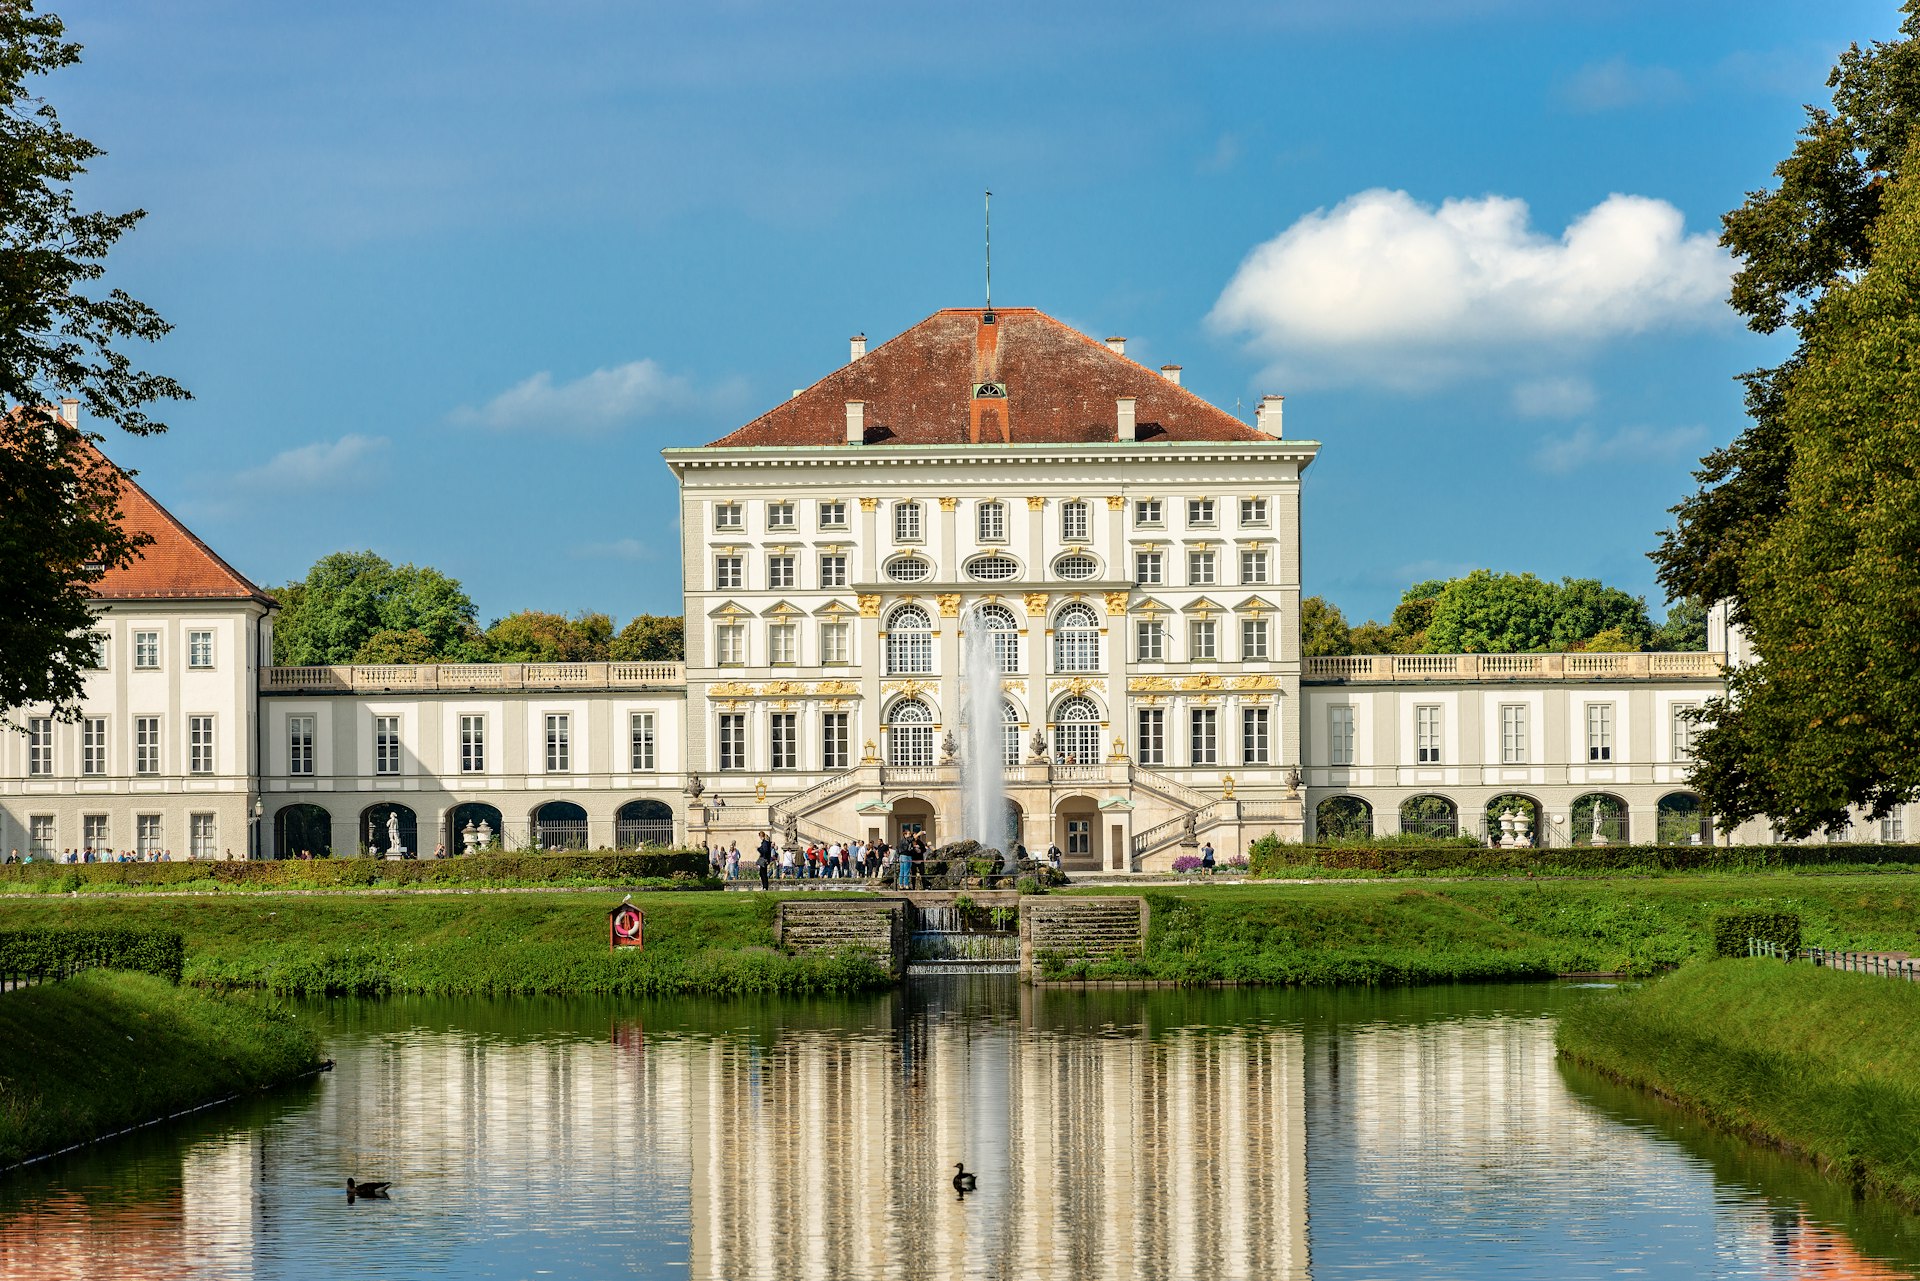 The grounds of Schloss Nymphenburg reflected in the river